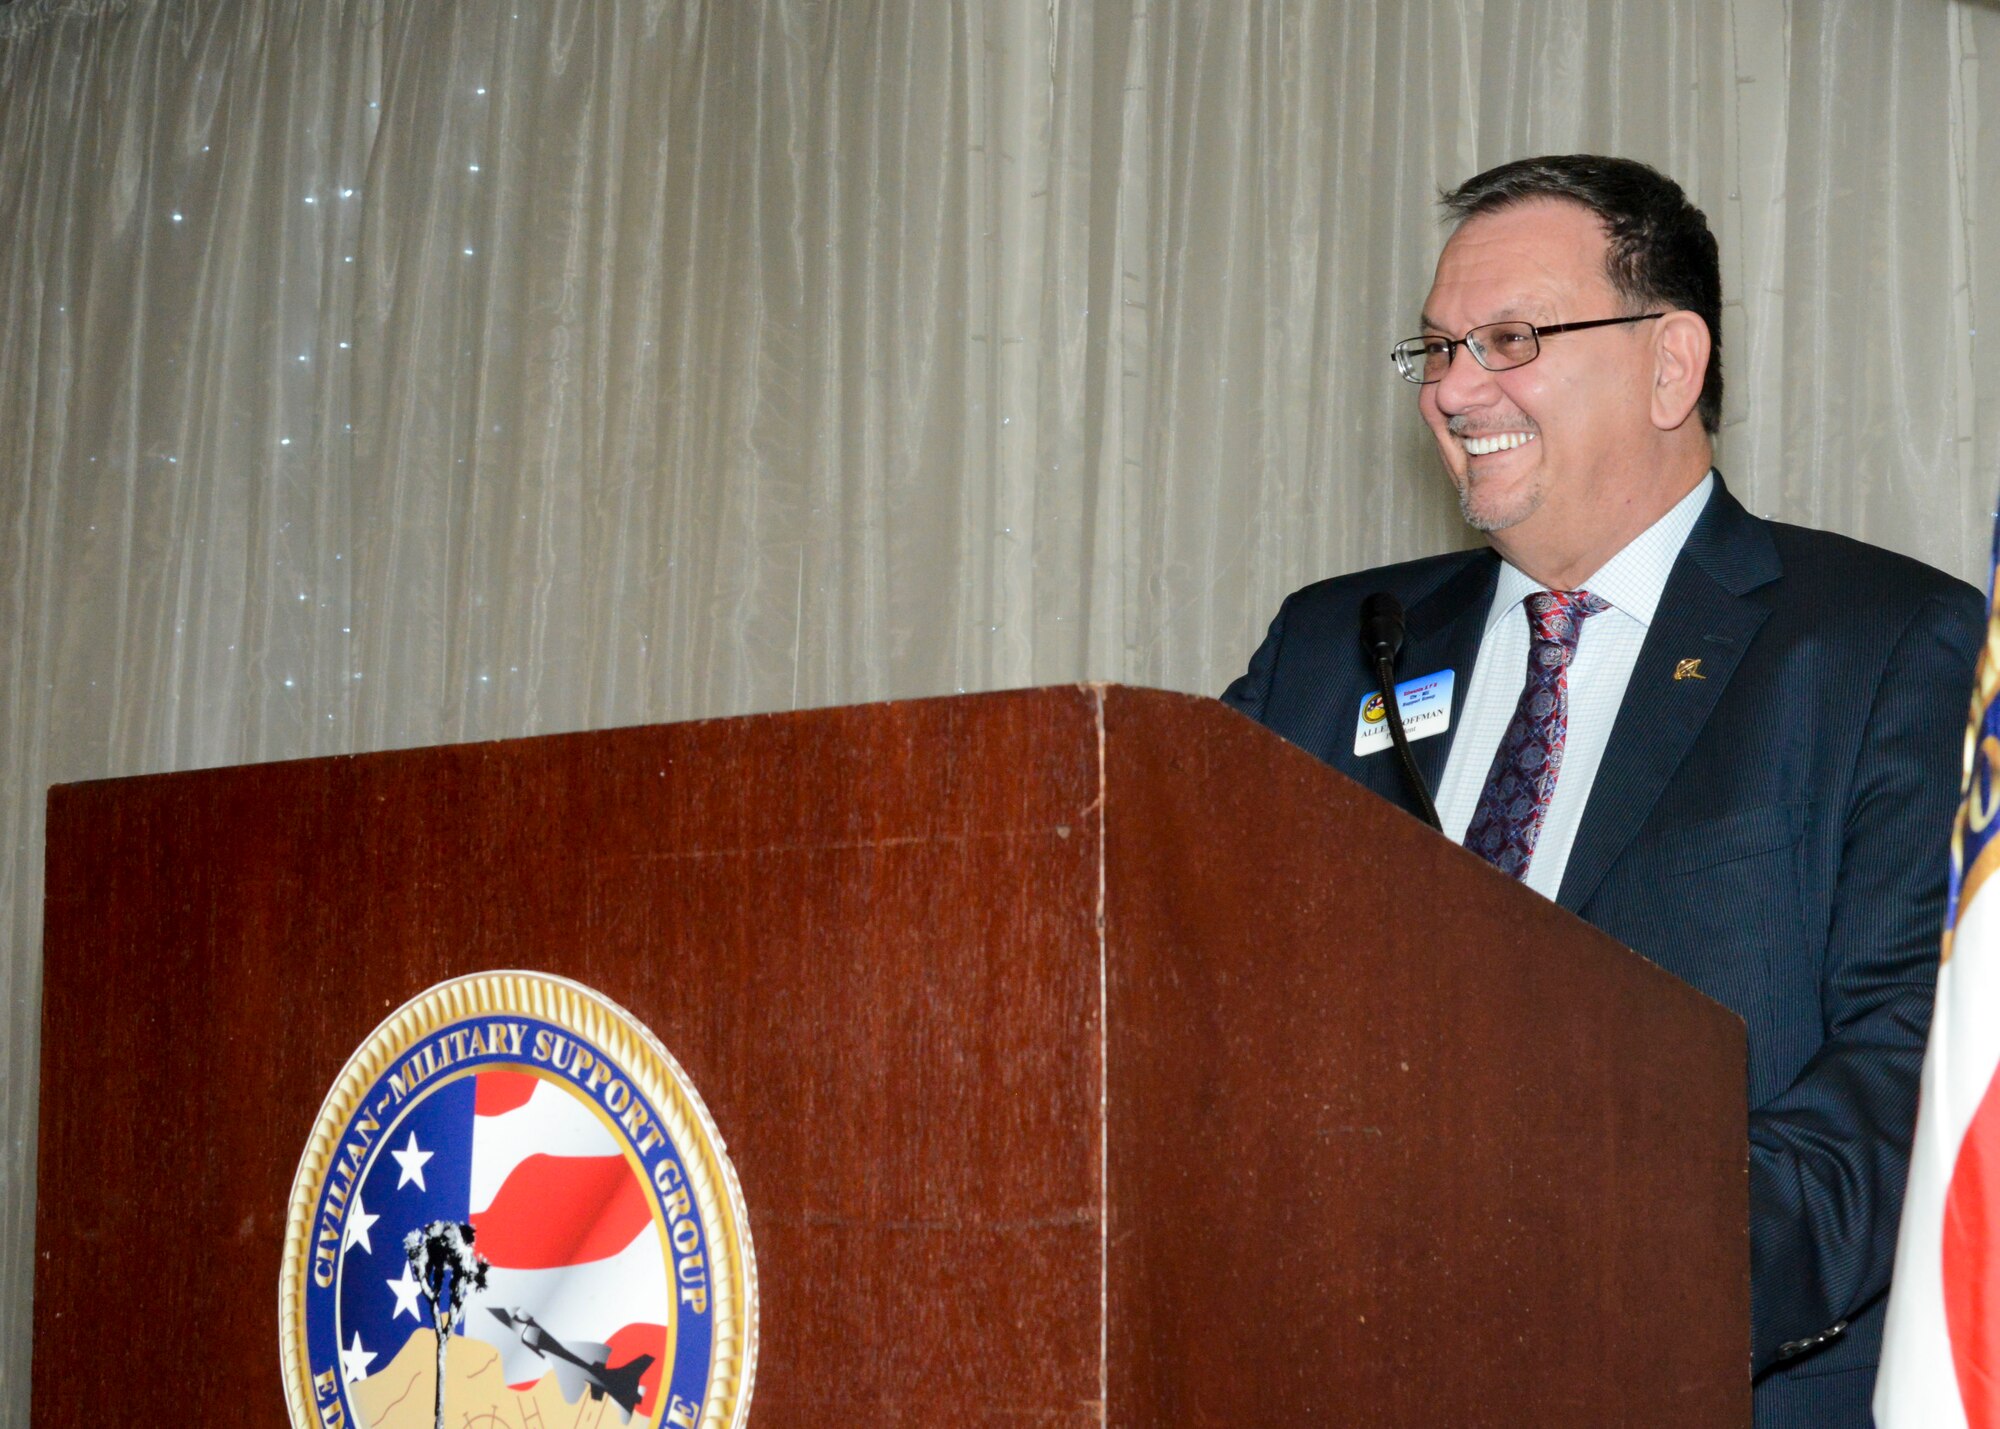 Allen Hoffman, Edwards Air Force Base Civilian-Military Support Group president, addresses those in attendance at the Edwards AFB Civ-Mil’s Annual Installation of Officers and Directors dinner banquet at the University of Antelope Valley in Lancaster, California, Nov. 2. (U.S. Air Force photo by Giancarlo Casem)